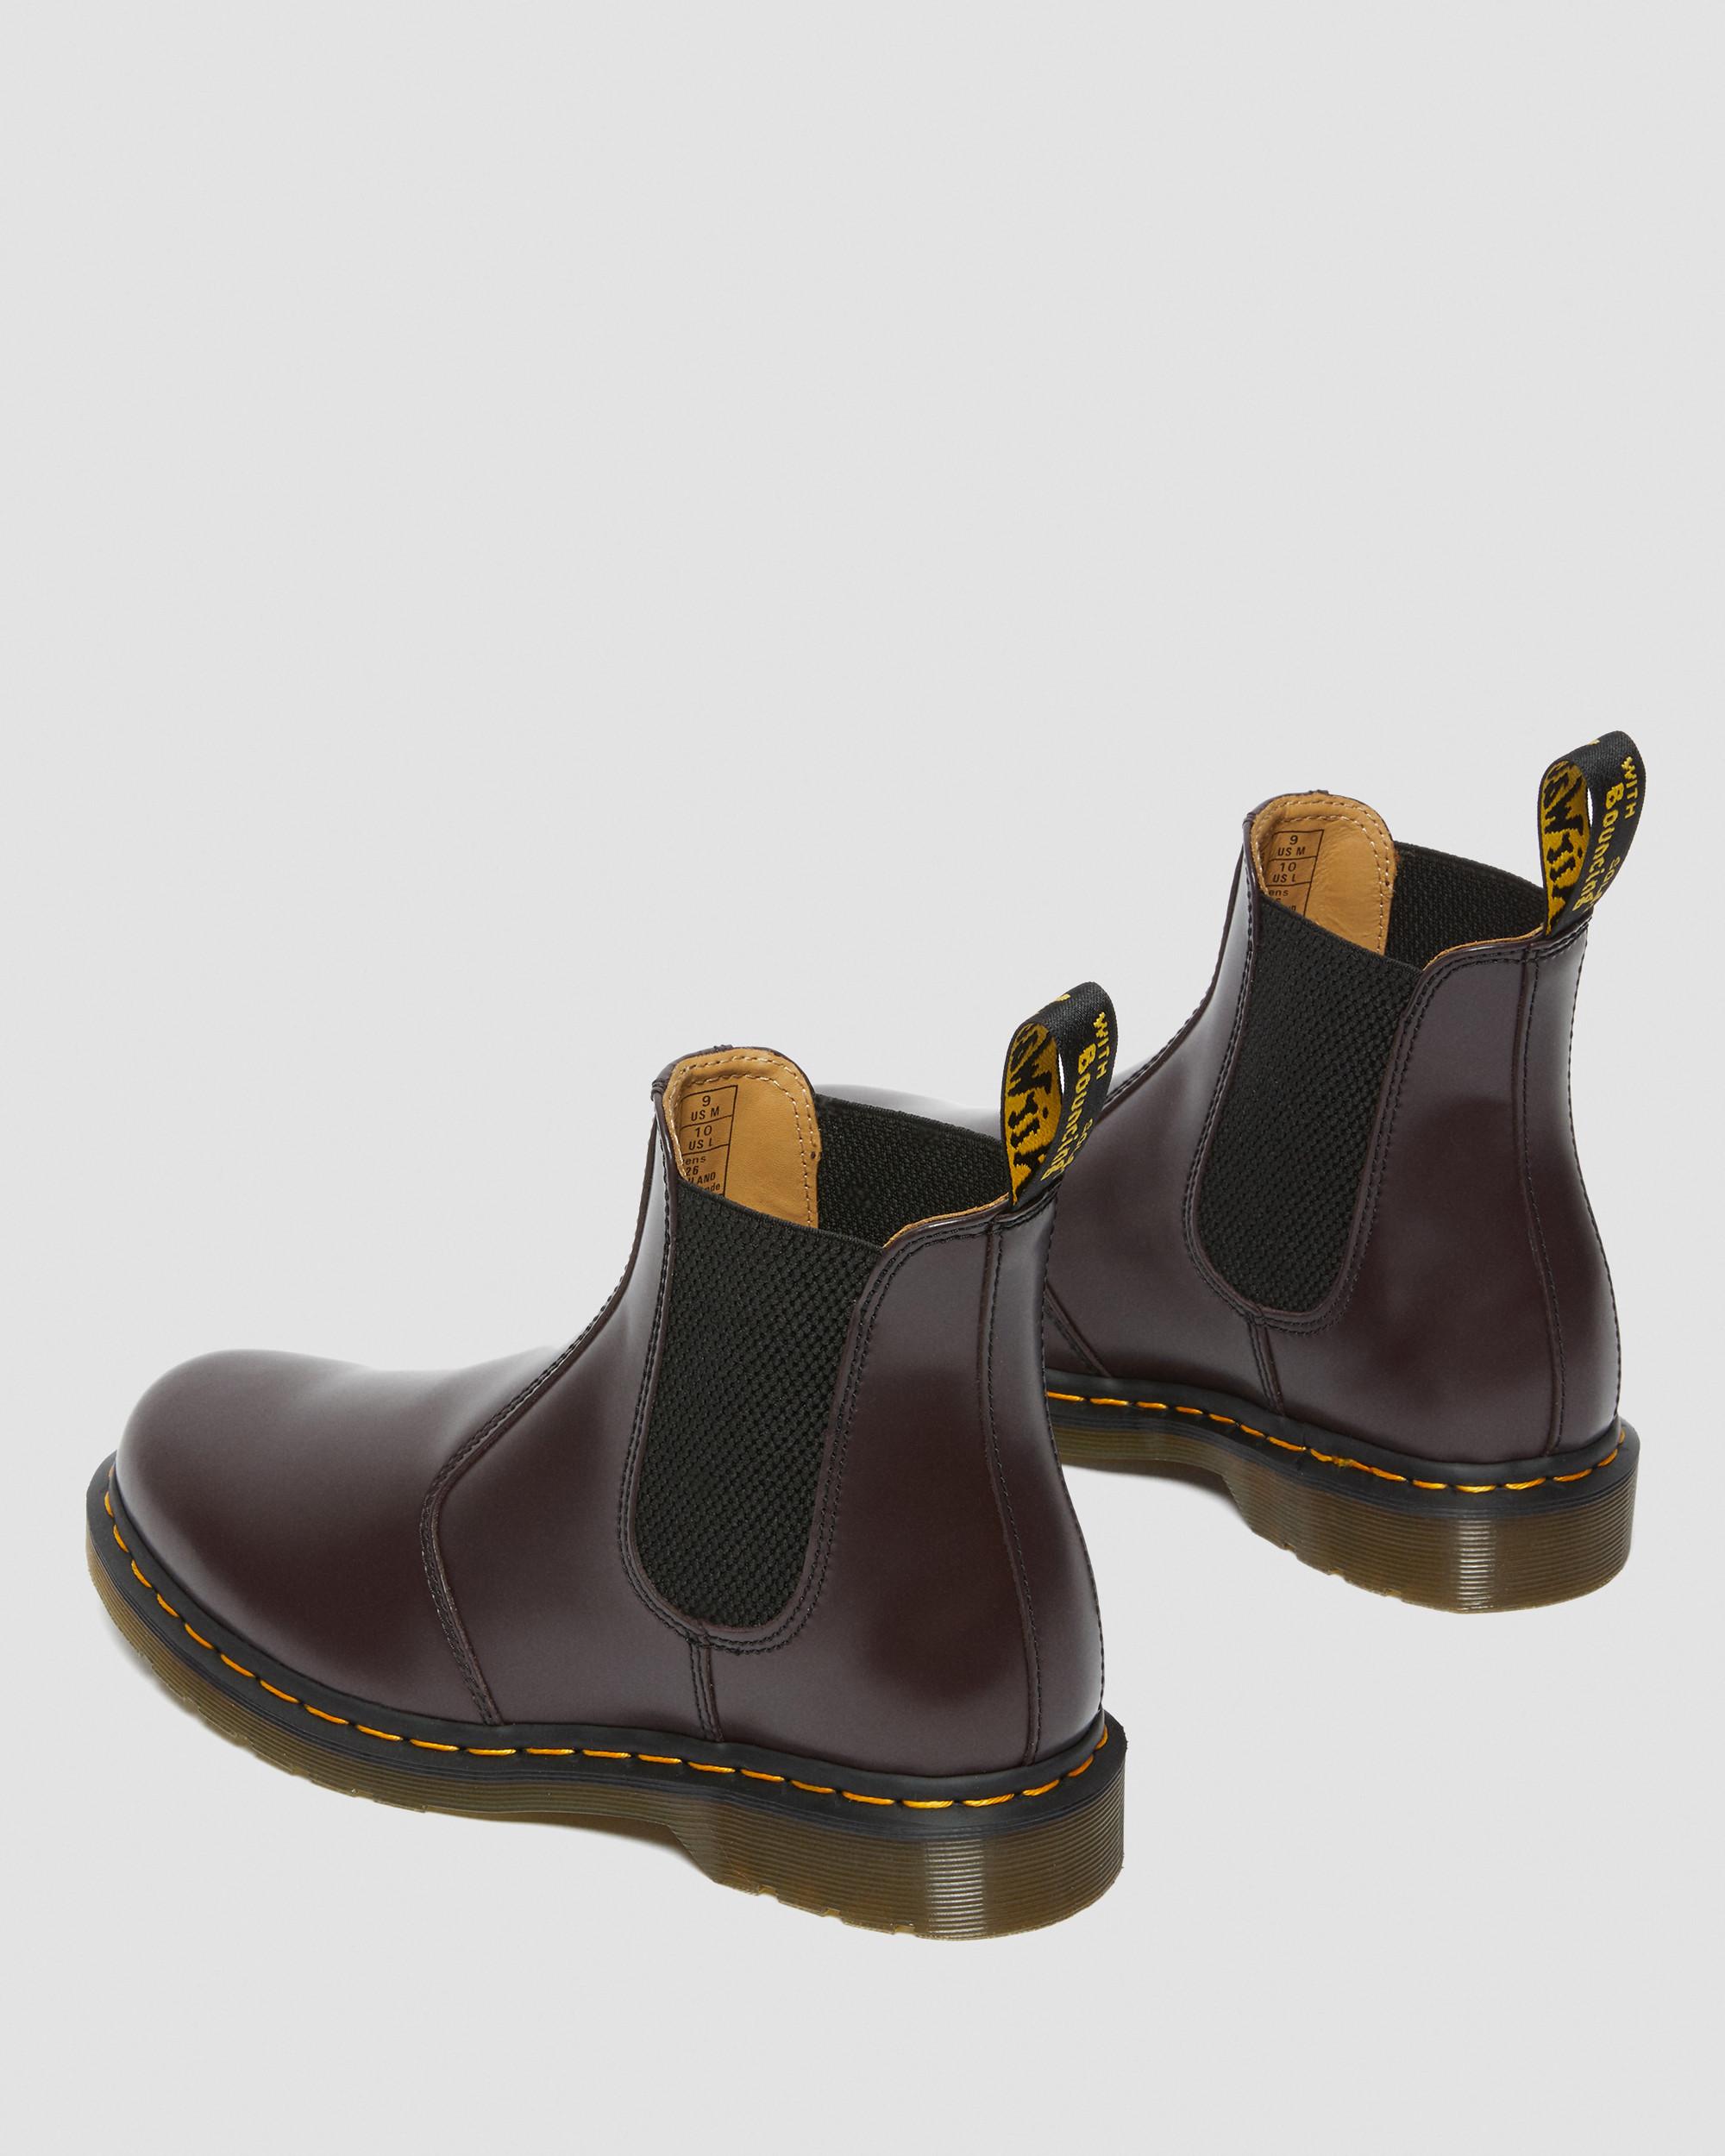 2976 Yellow Stitch Smooth Leather Chelsea Boots in Burgundy